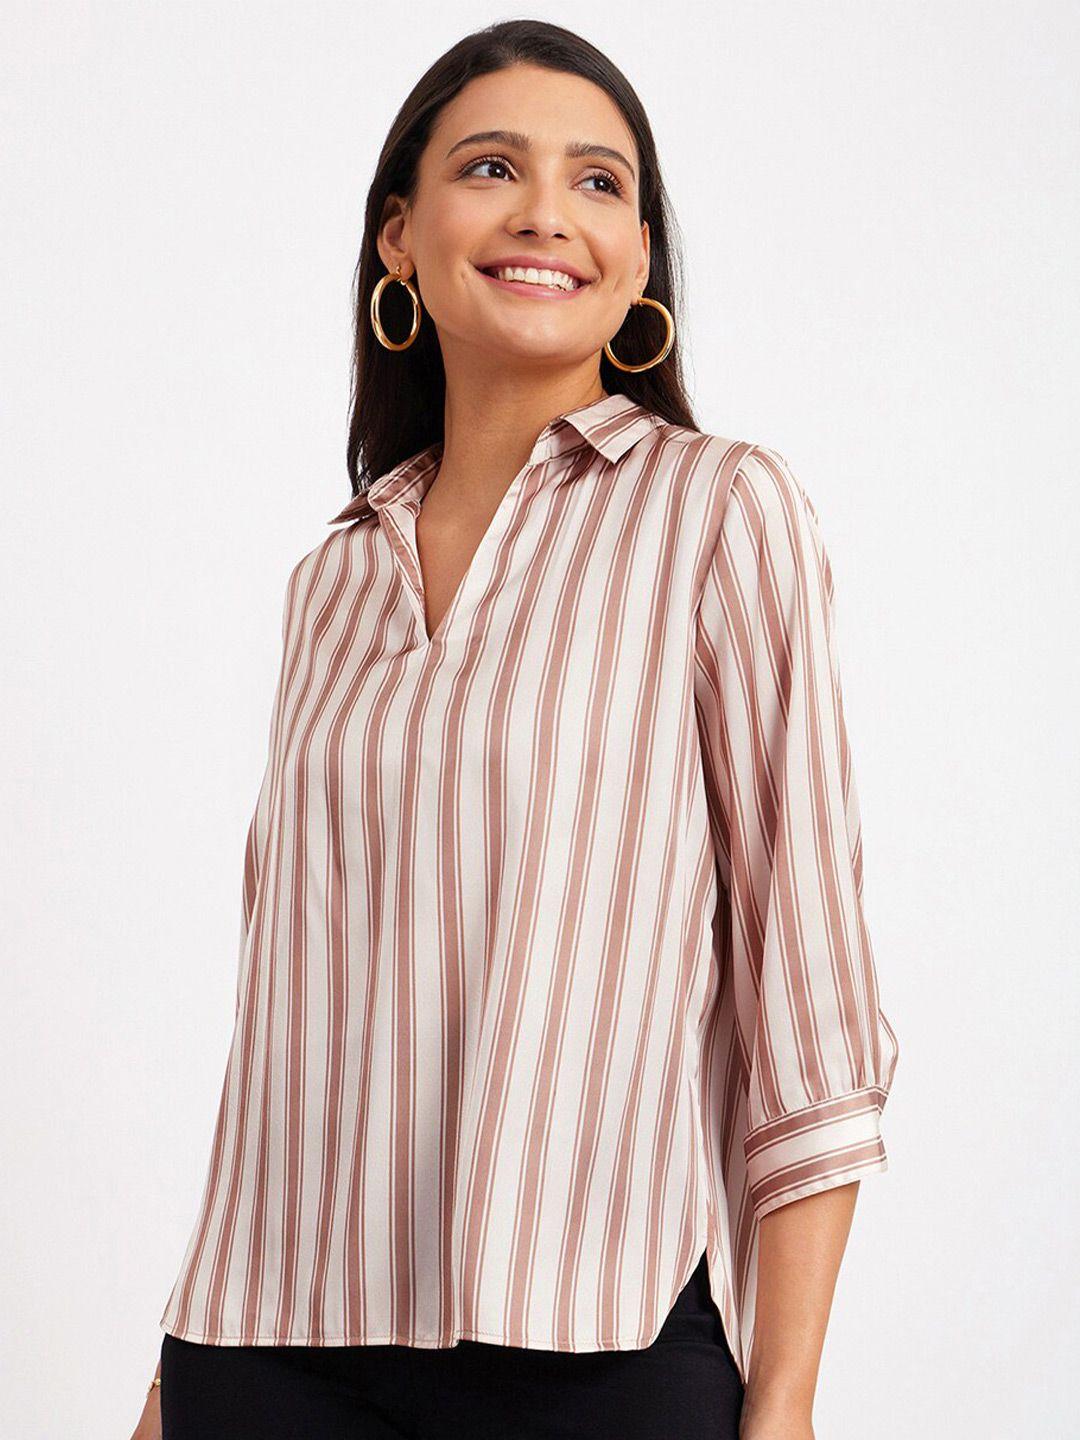 fablestreet-striped-satin-shirt-style-top